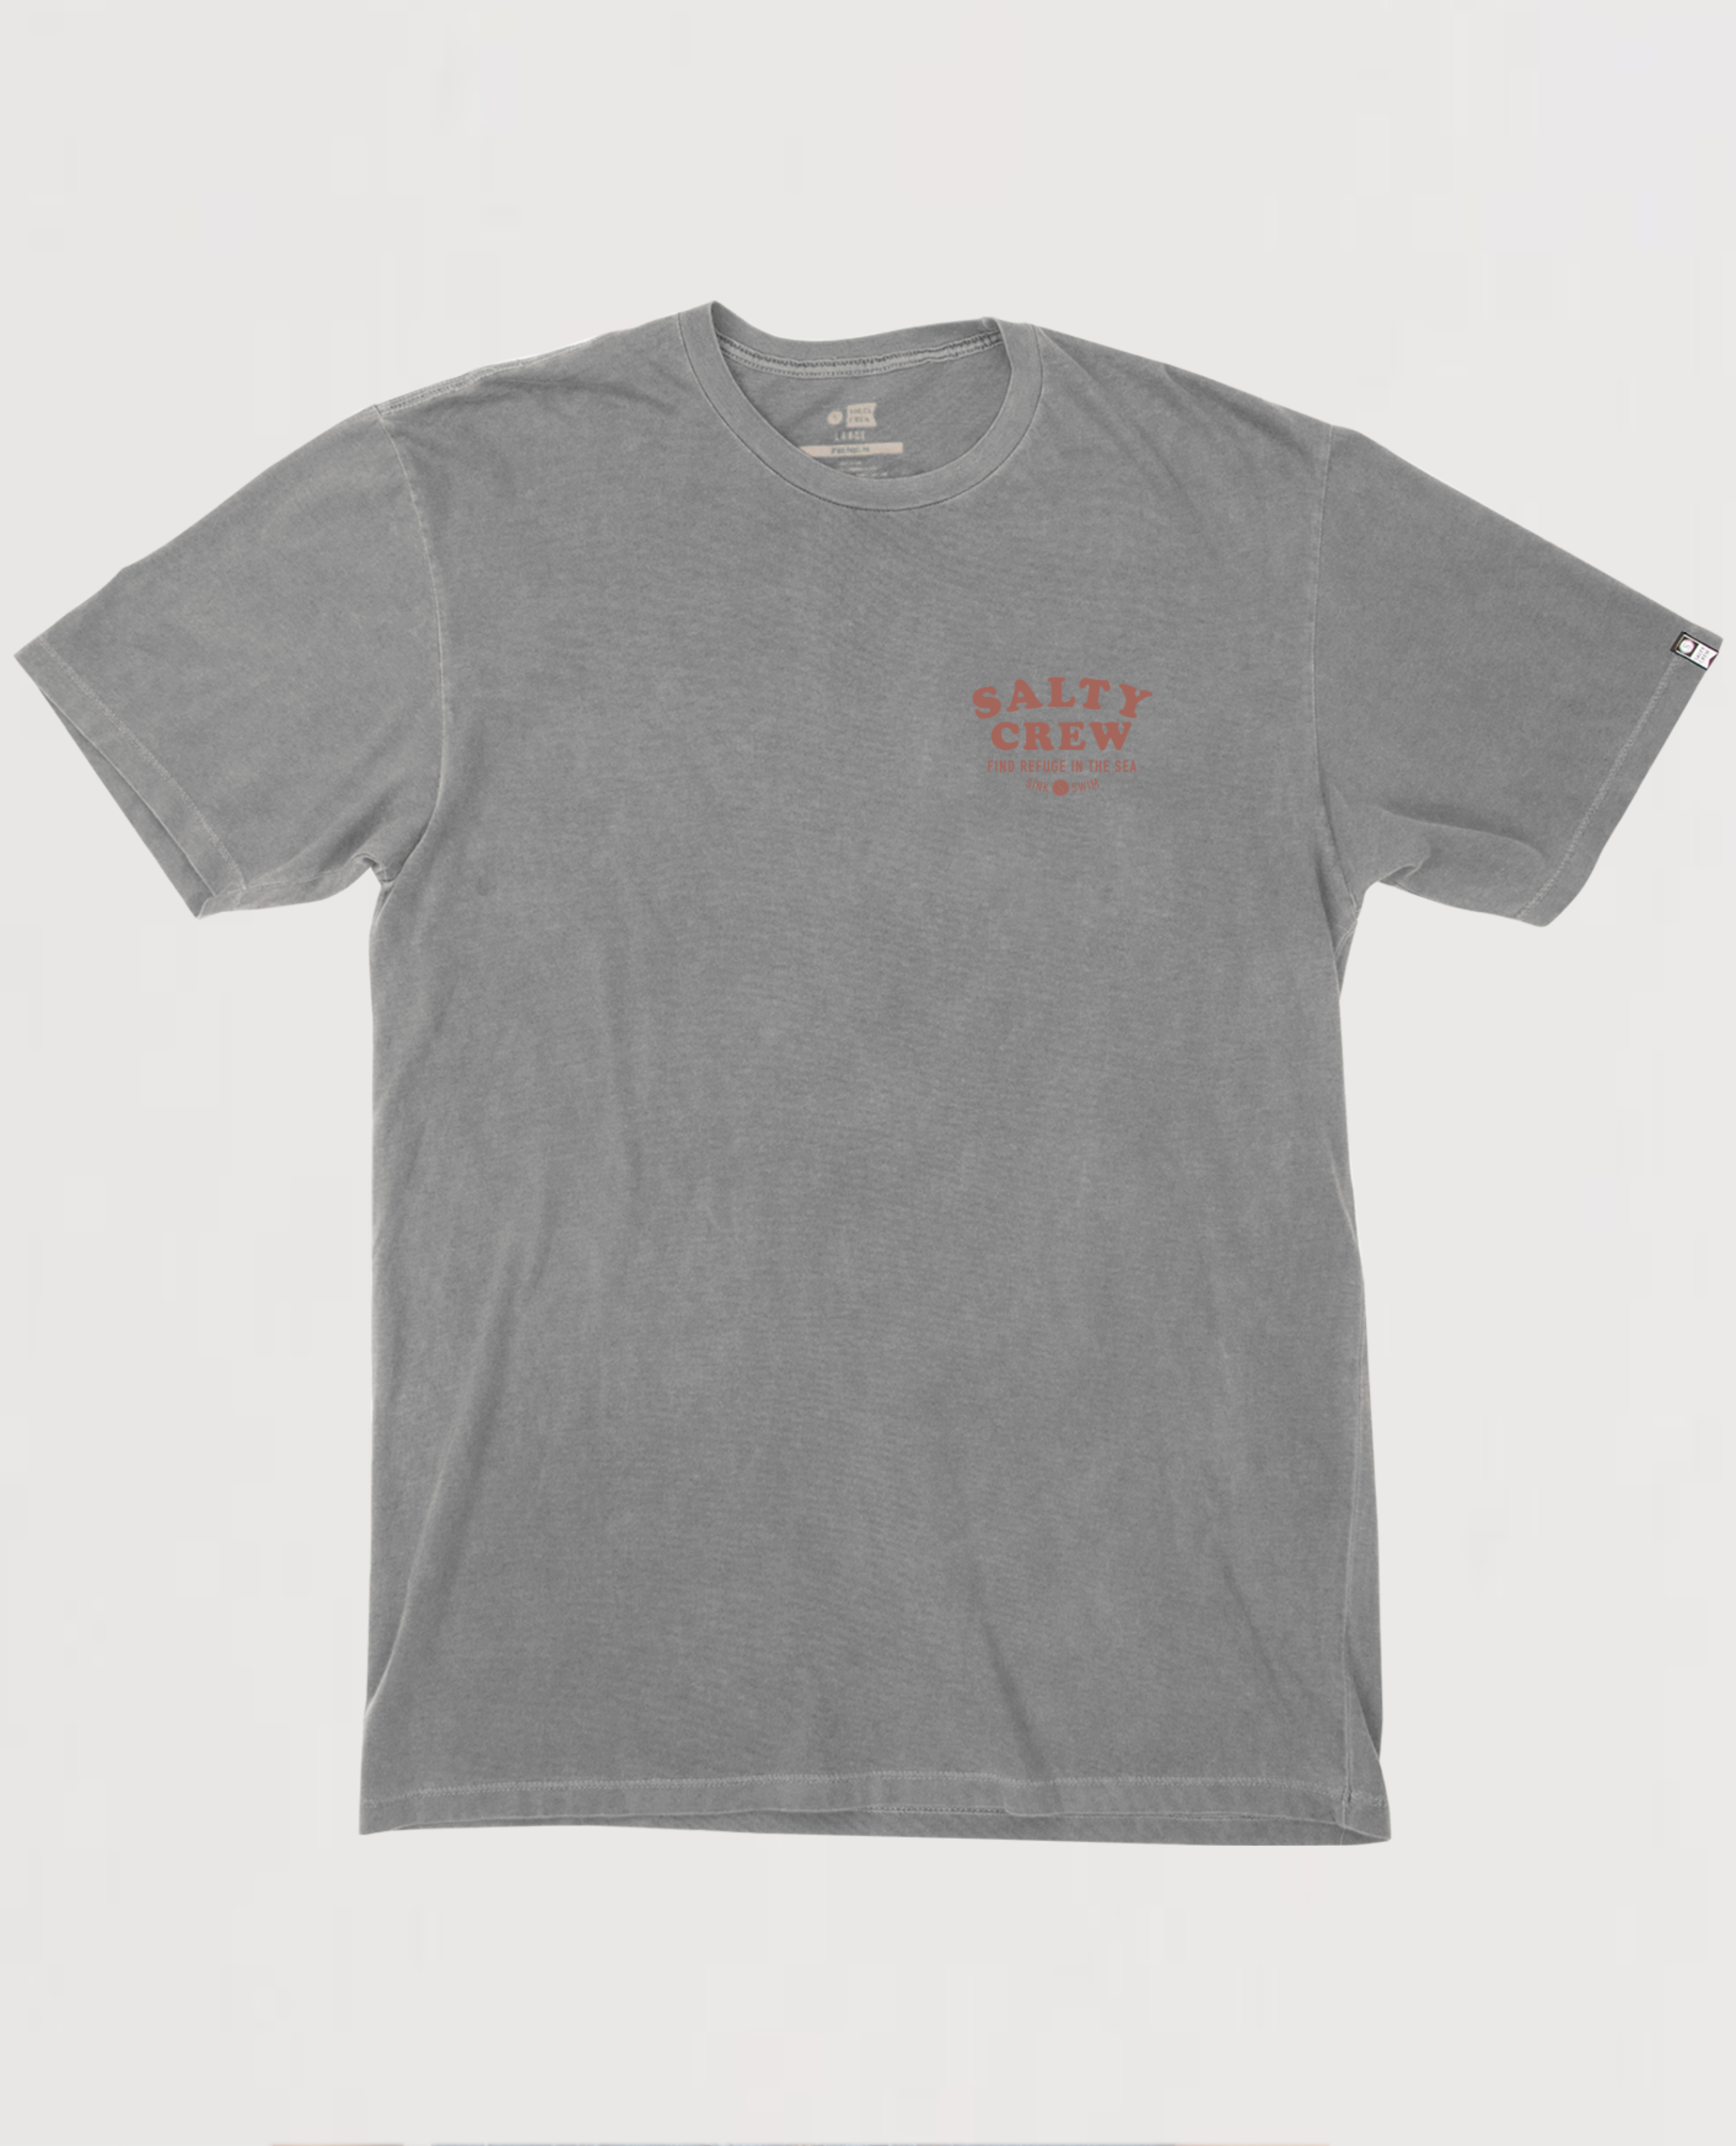 Inlet SS overdyed tee